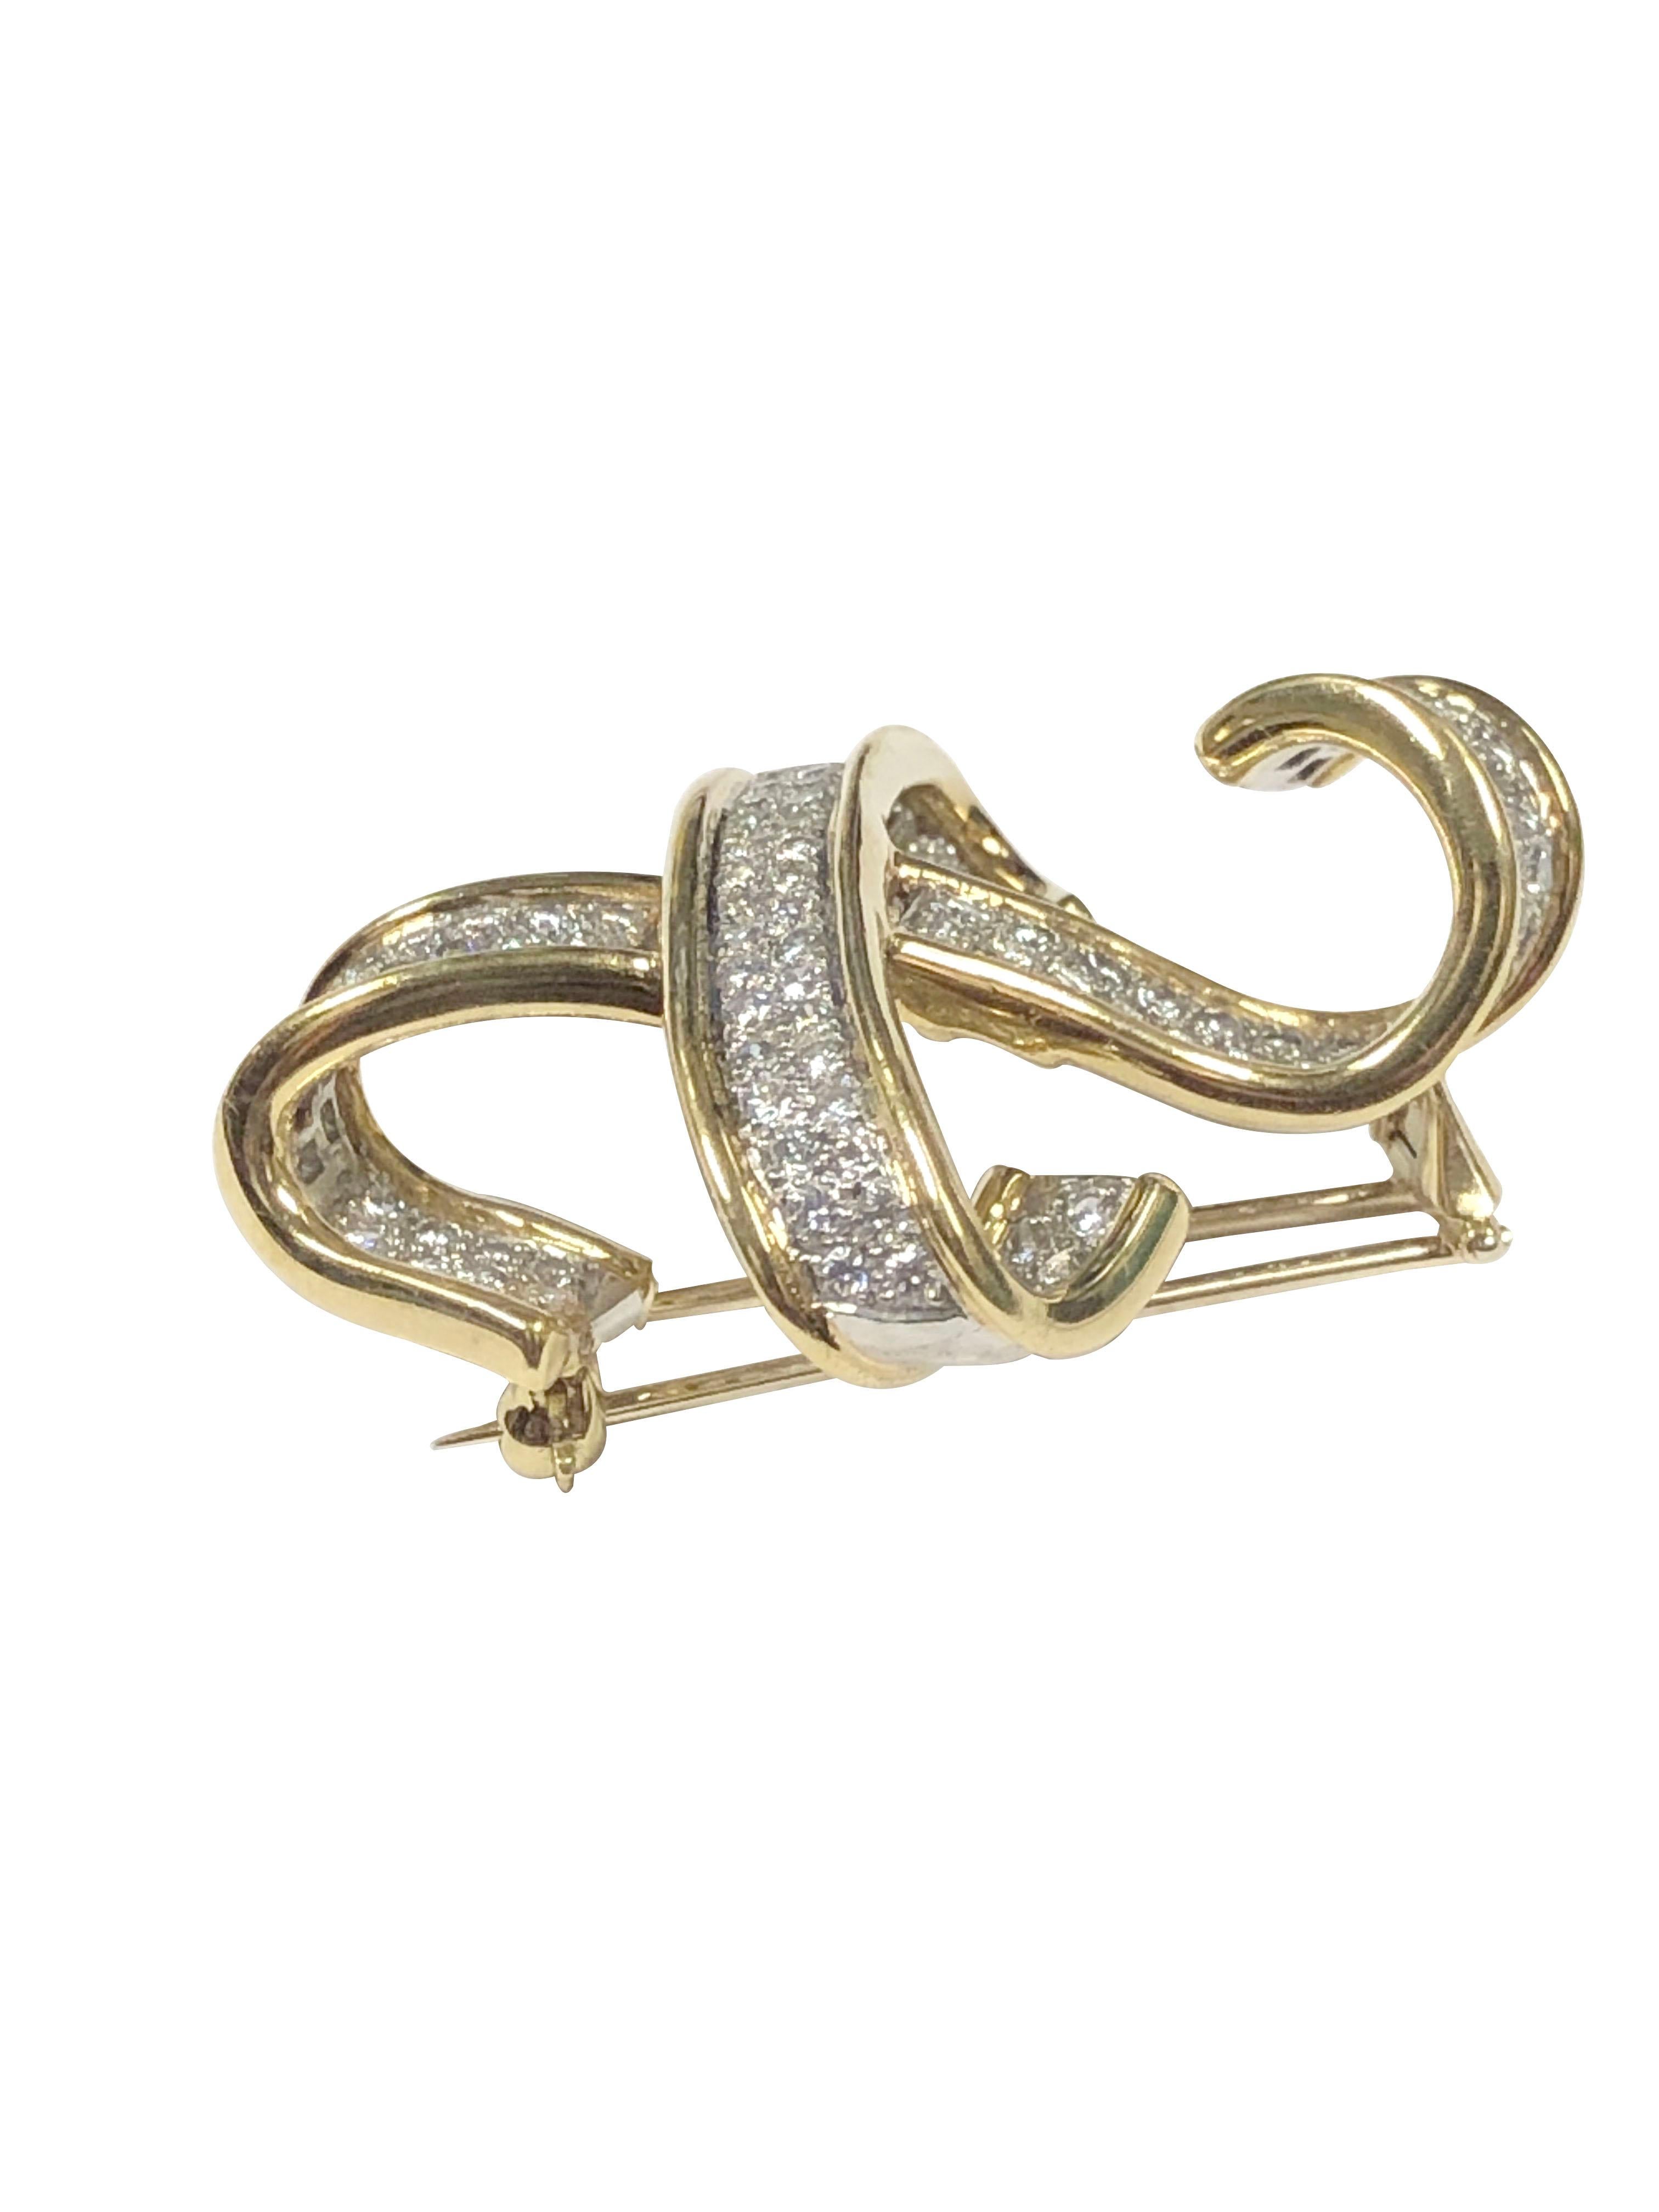 Tiffany & Company Paloma Picasso Diamond and Yellow Gold X Brooch In Excellent Condition For Sale In Chicago, IL